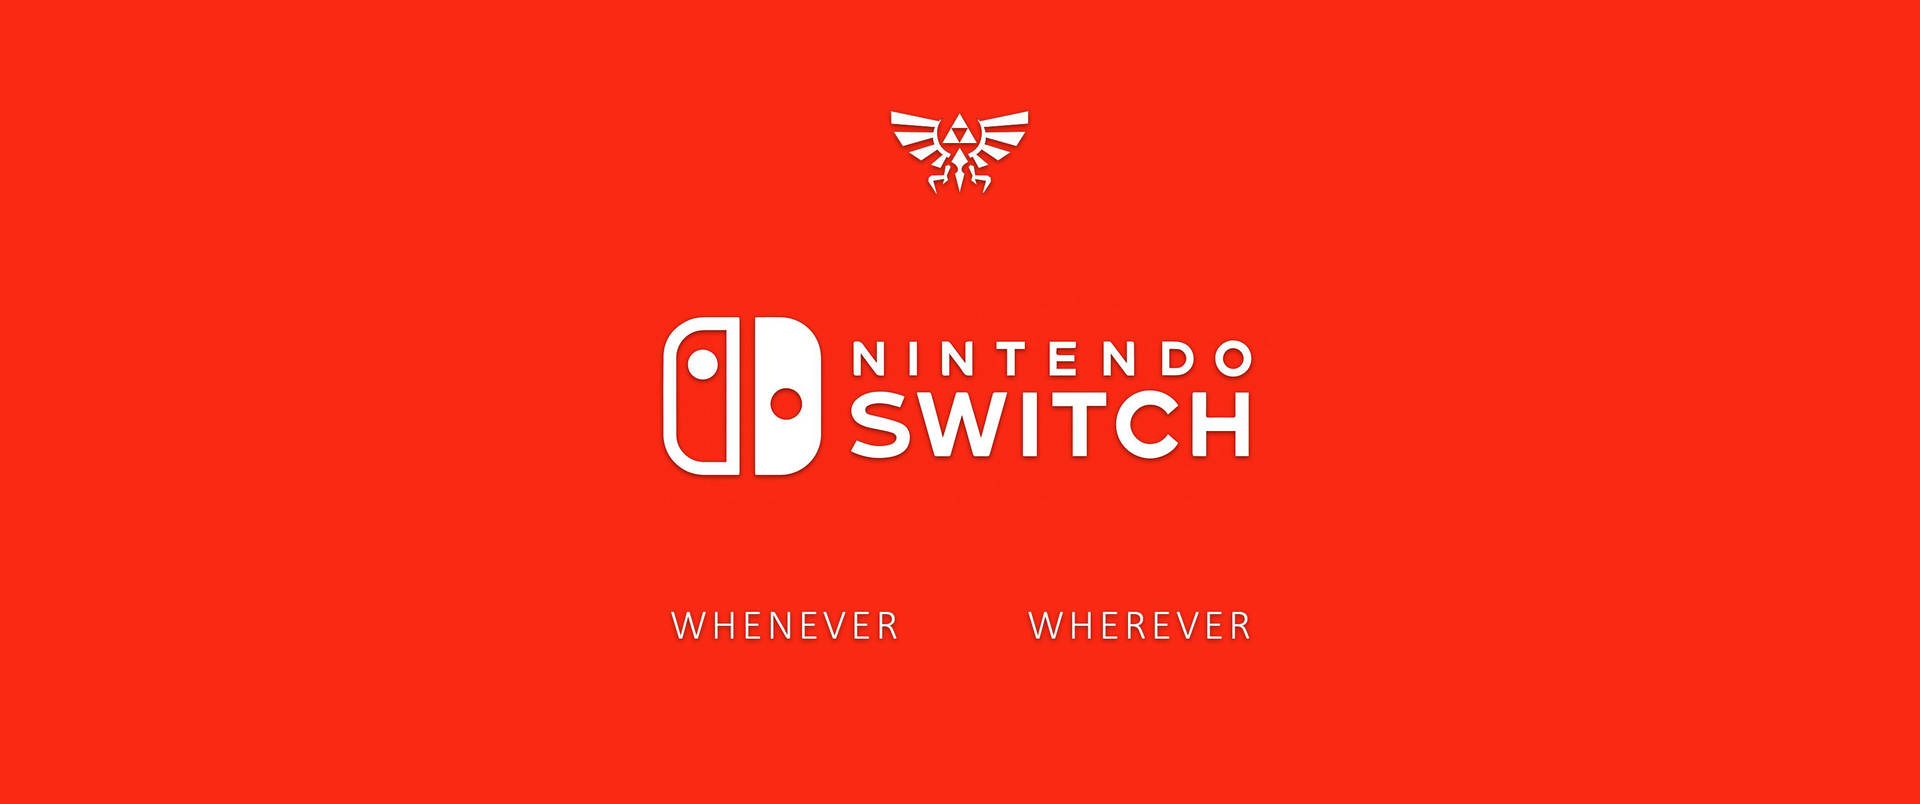 Nintendo Switch 3440X1440 Wallpaper and Background Image